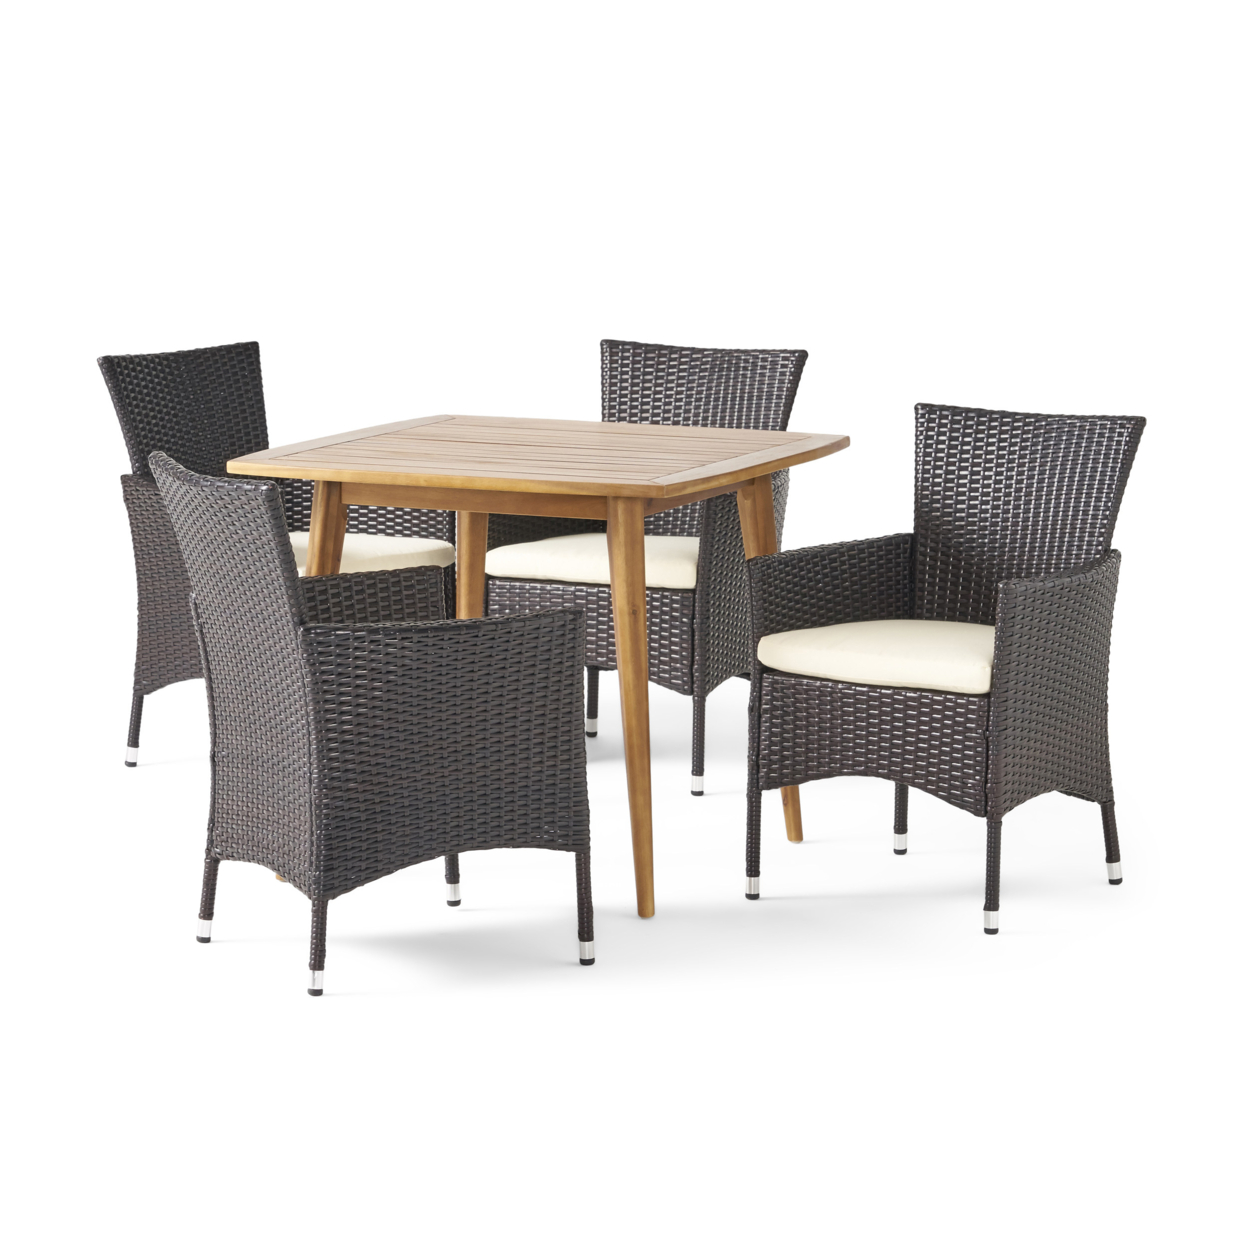 Lauryn Outdoor 5 Piece Wood And Wicker Dining Set, Teak And Multi Brown